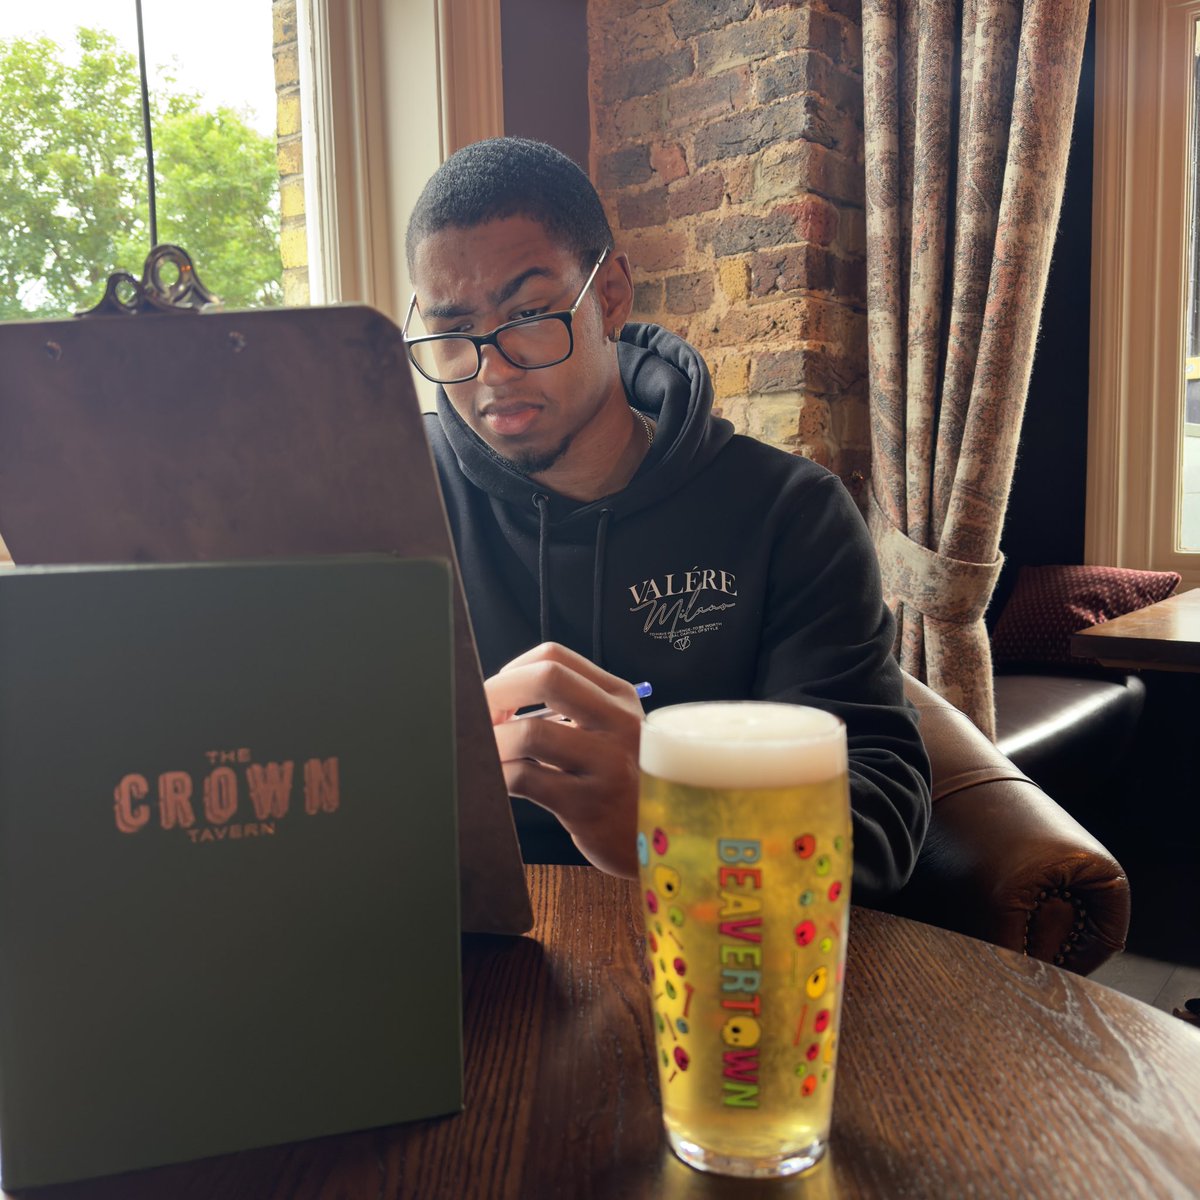 Did somebody say Quiz? 

Join us for our next quiz night! 
Sunday 26th May 
8pm at The Crown 

£50 bar tab up for grabs for the winning team 💵 

£2pp entry with all proceeds going to the wooden spoon charity 

@youngspubs  

#quiznight #quiz #pubs #pubquiz #SELpubs #londonpubs